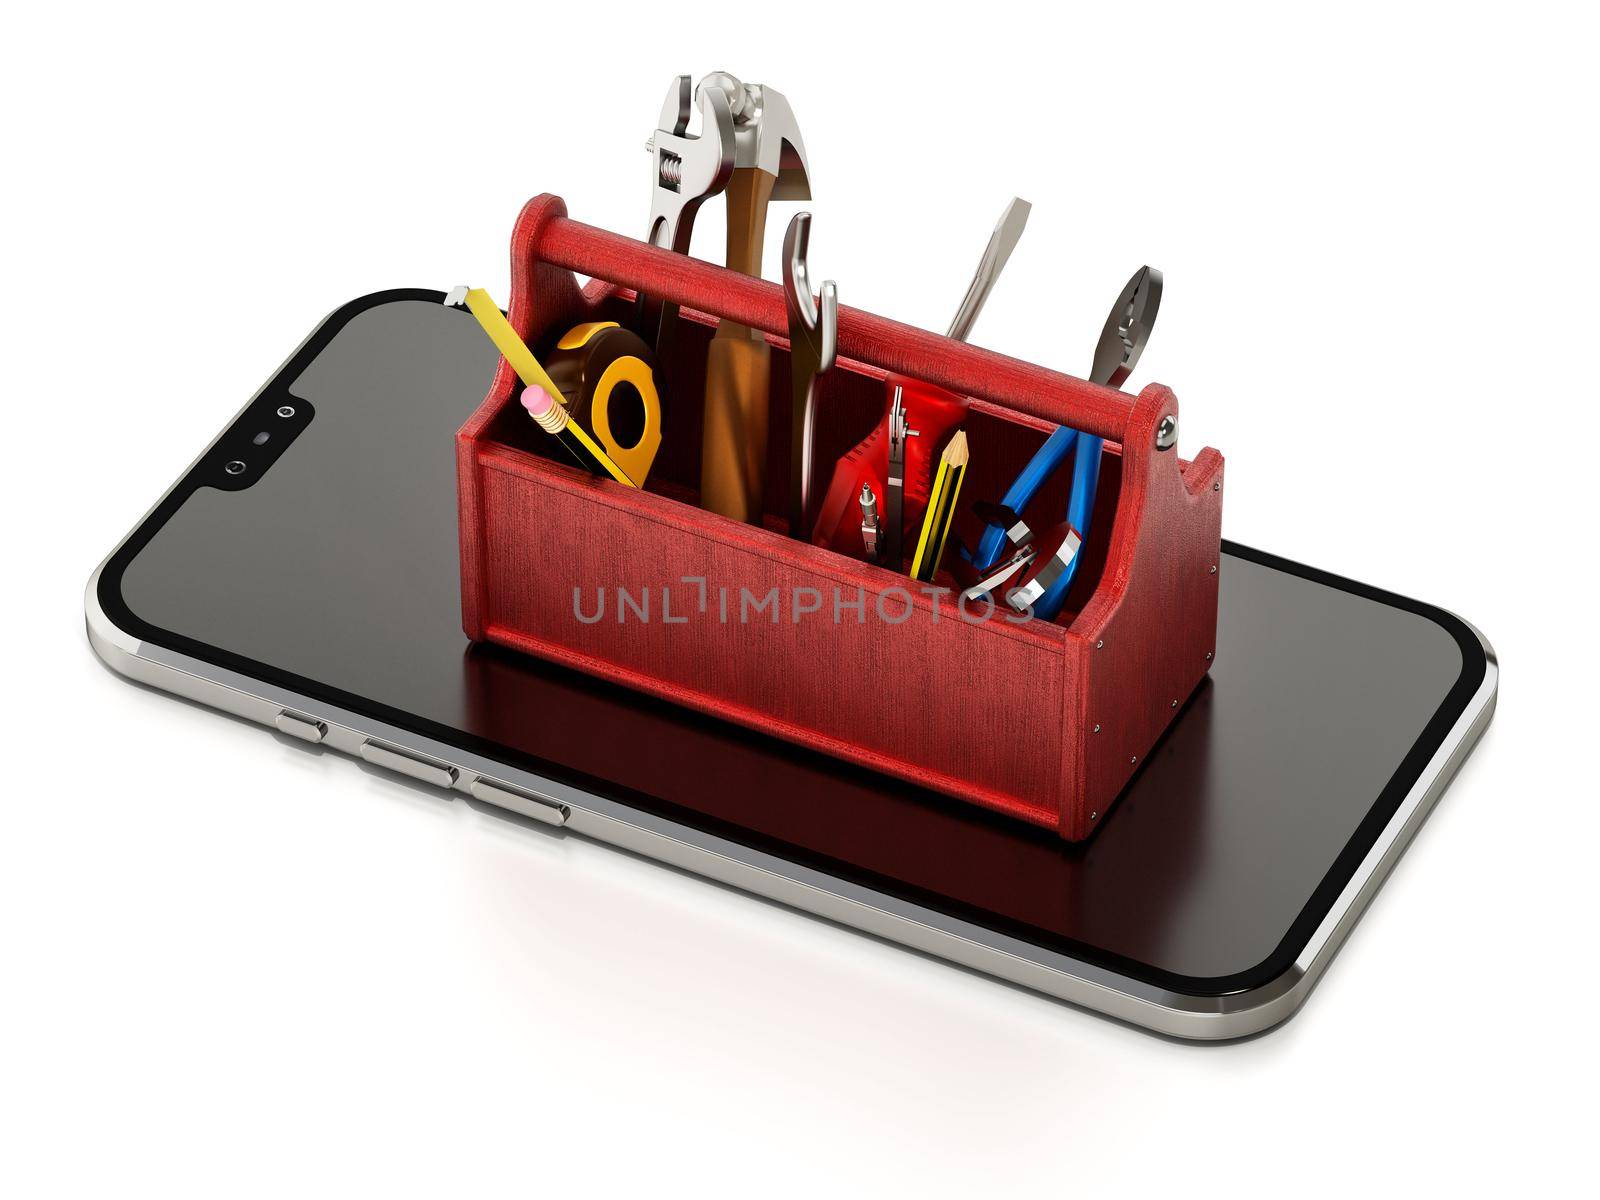 Toolbox with repair tools standing on generic smartphone. 3D illustration.